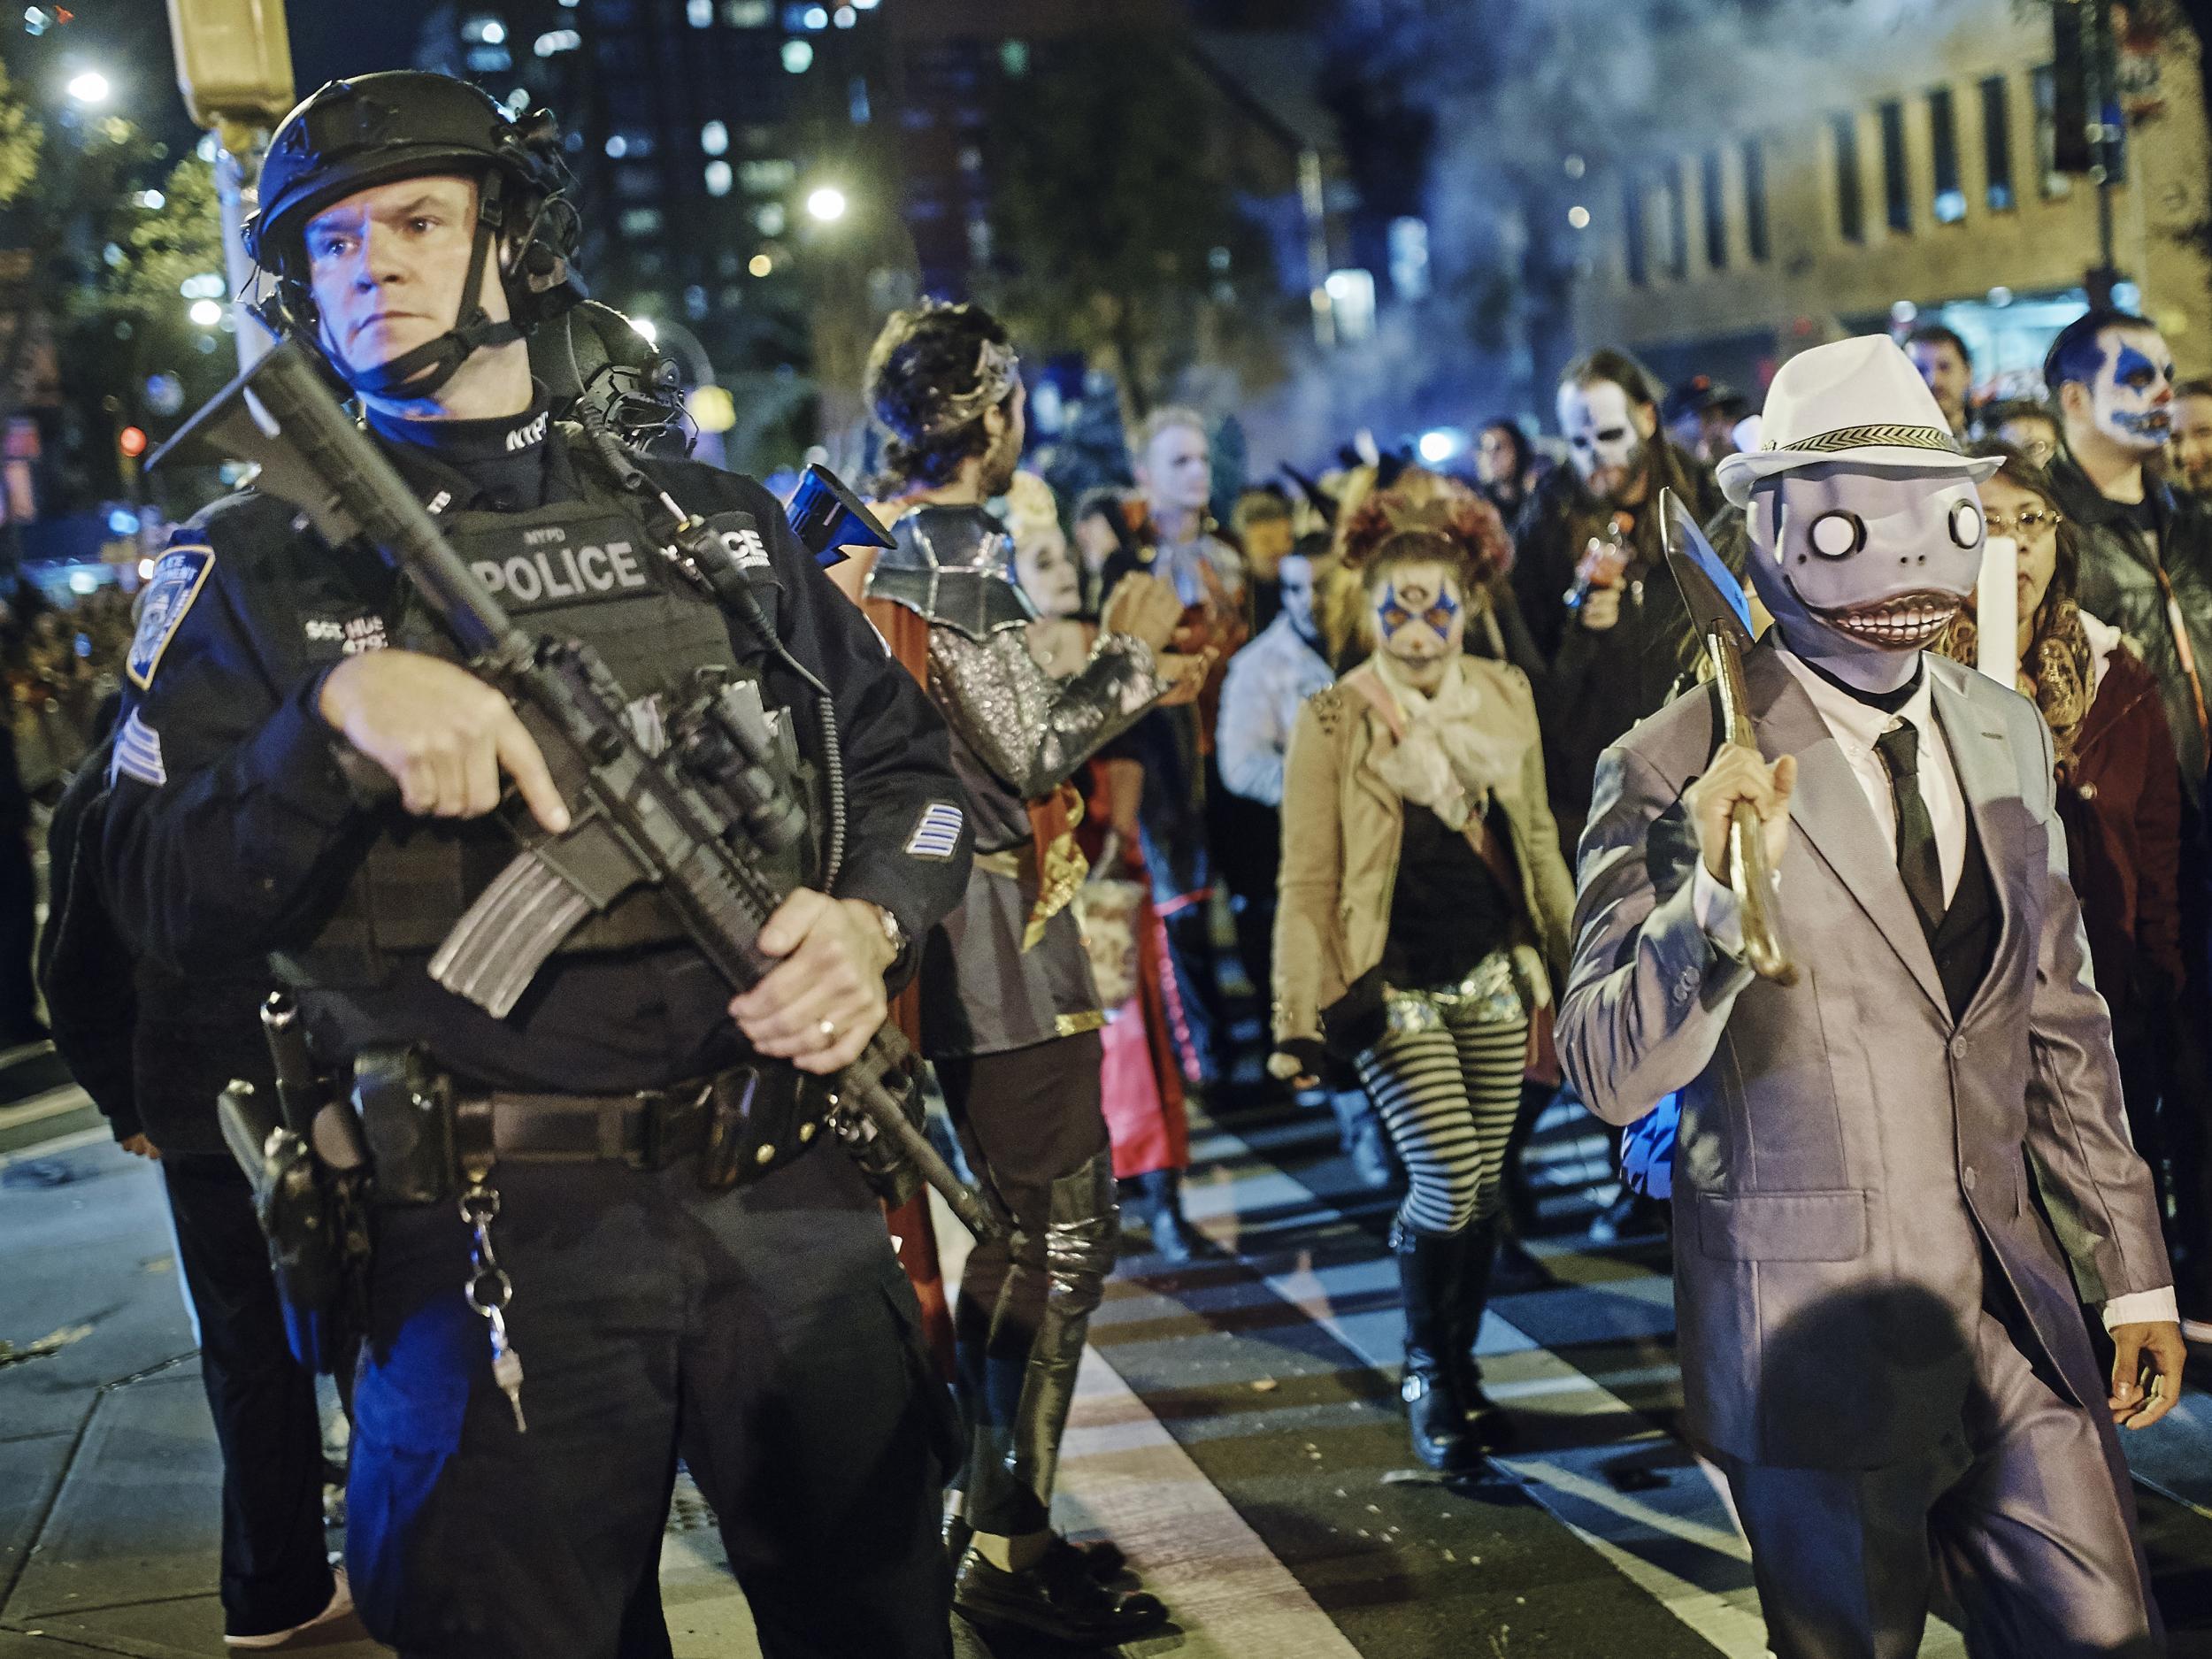 Heavily armed police stand guard as revellers march during the Greenwich Village Halloween Parade